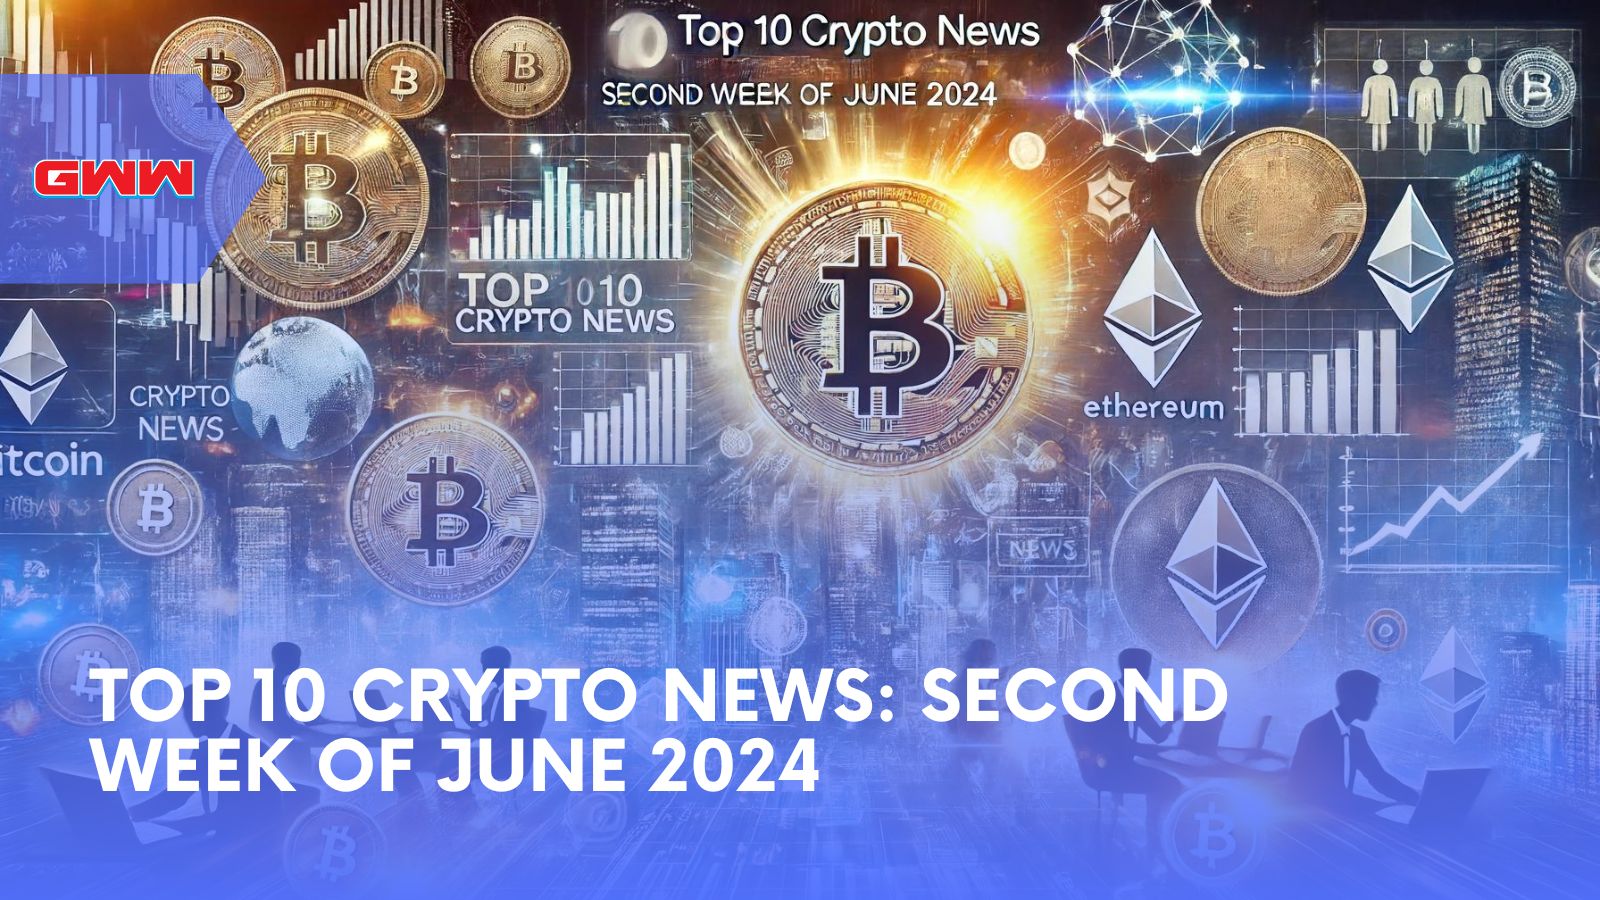 Top 10 Crypto News: Second Week of June 2024